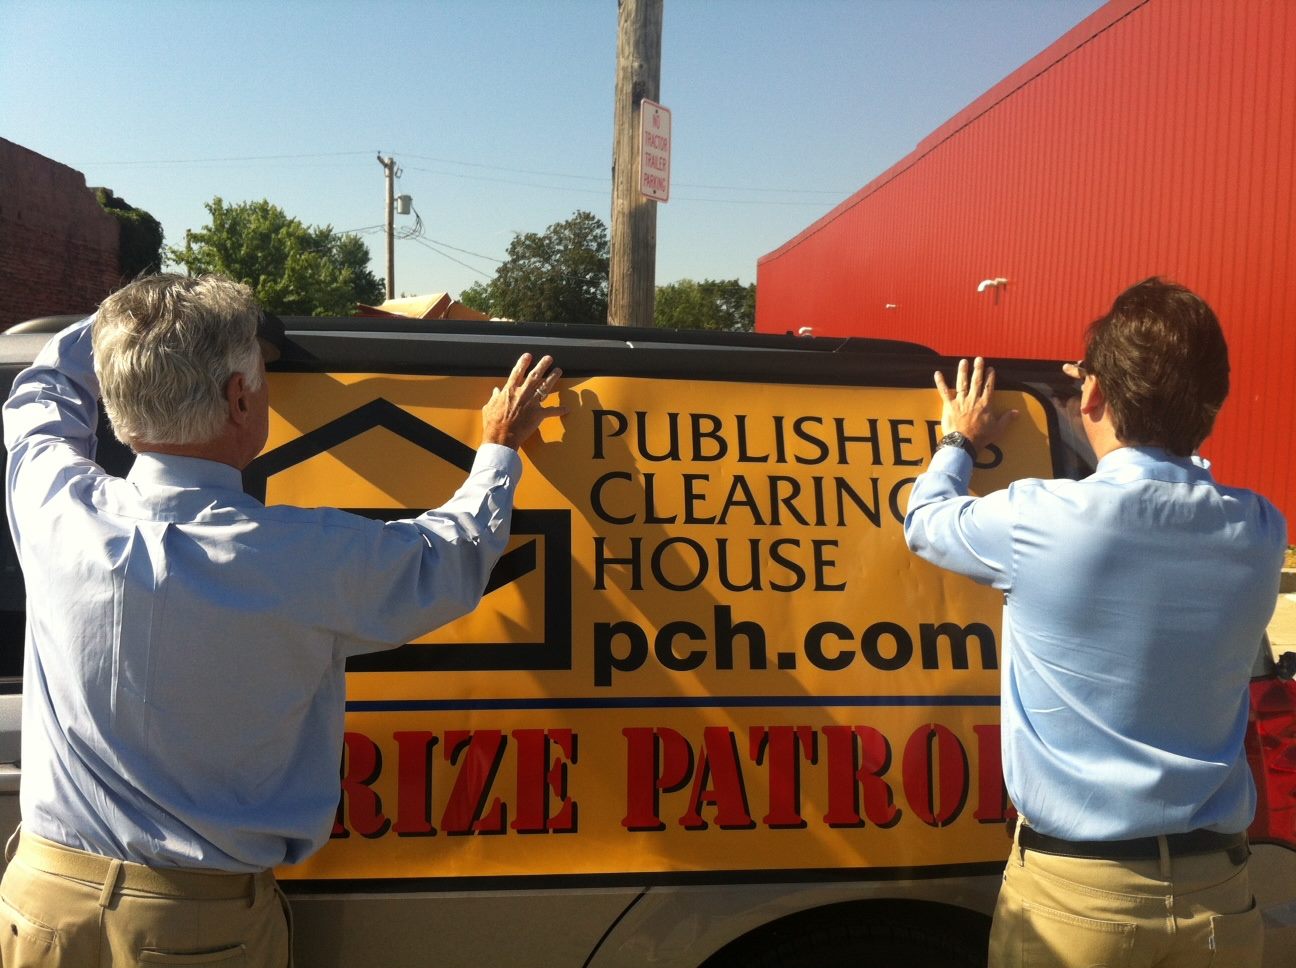 Todd and Dave with Prize Patrol Van